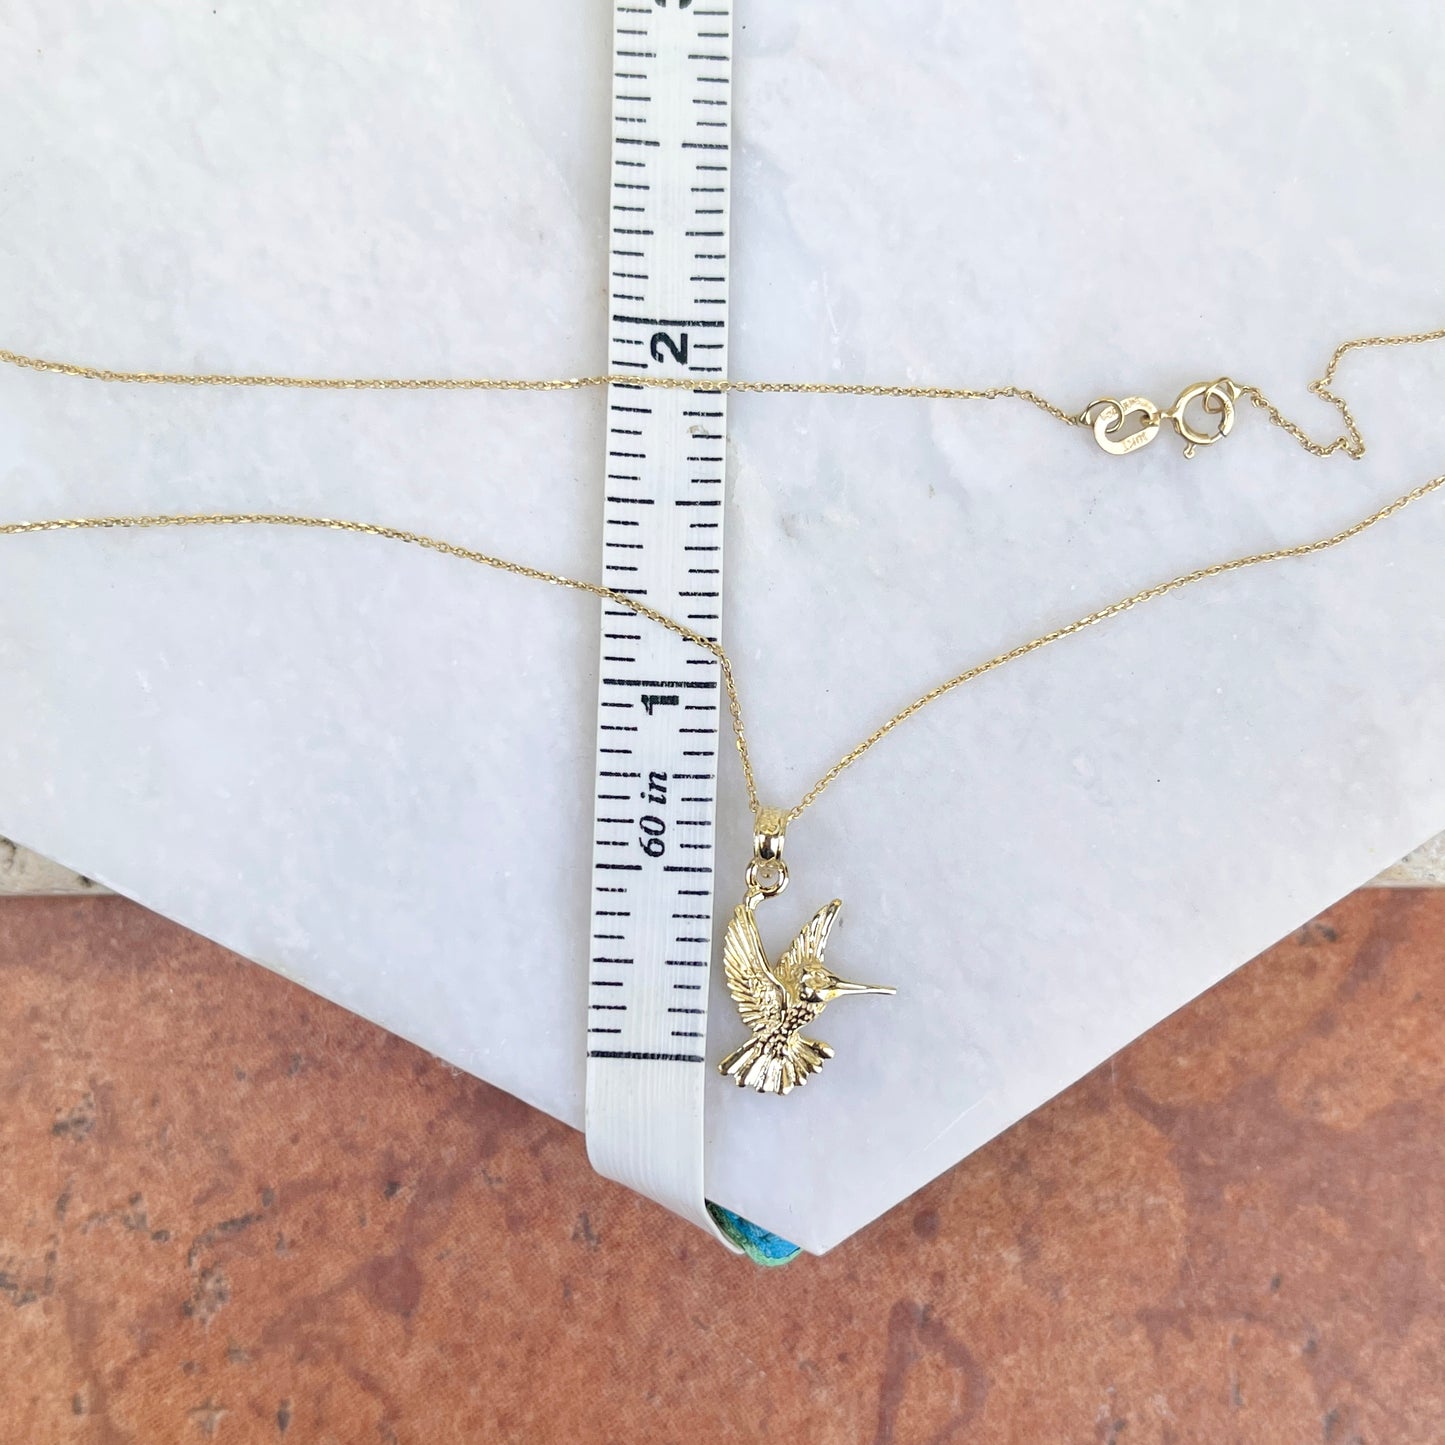 14KT Yellow Gold Flying Hummingbird Pendant Chain Necklace